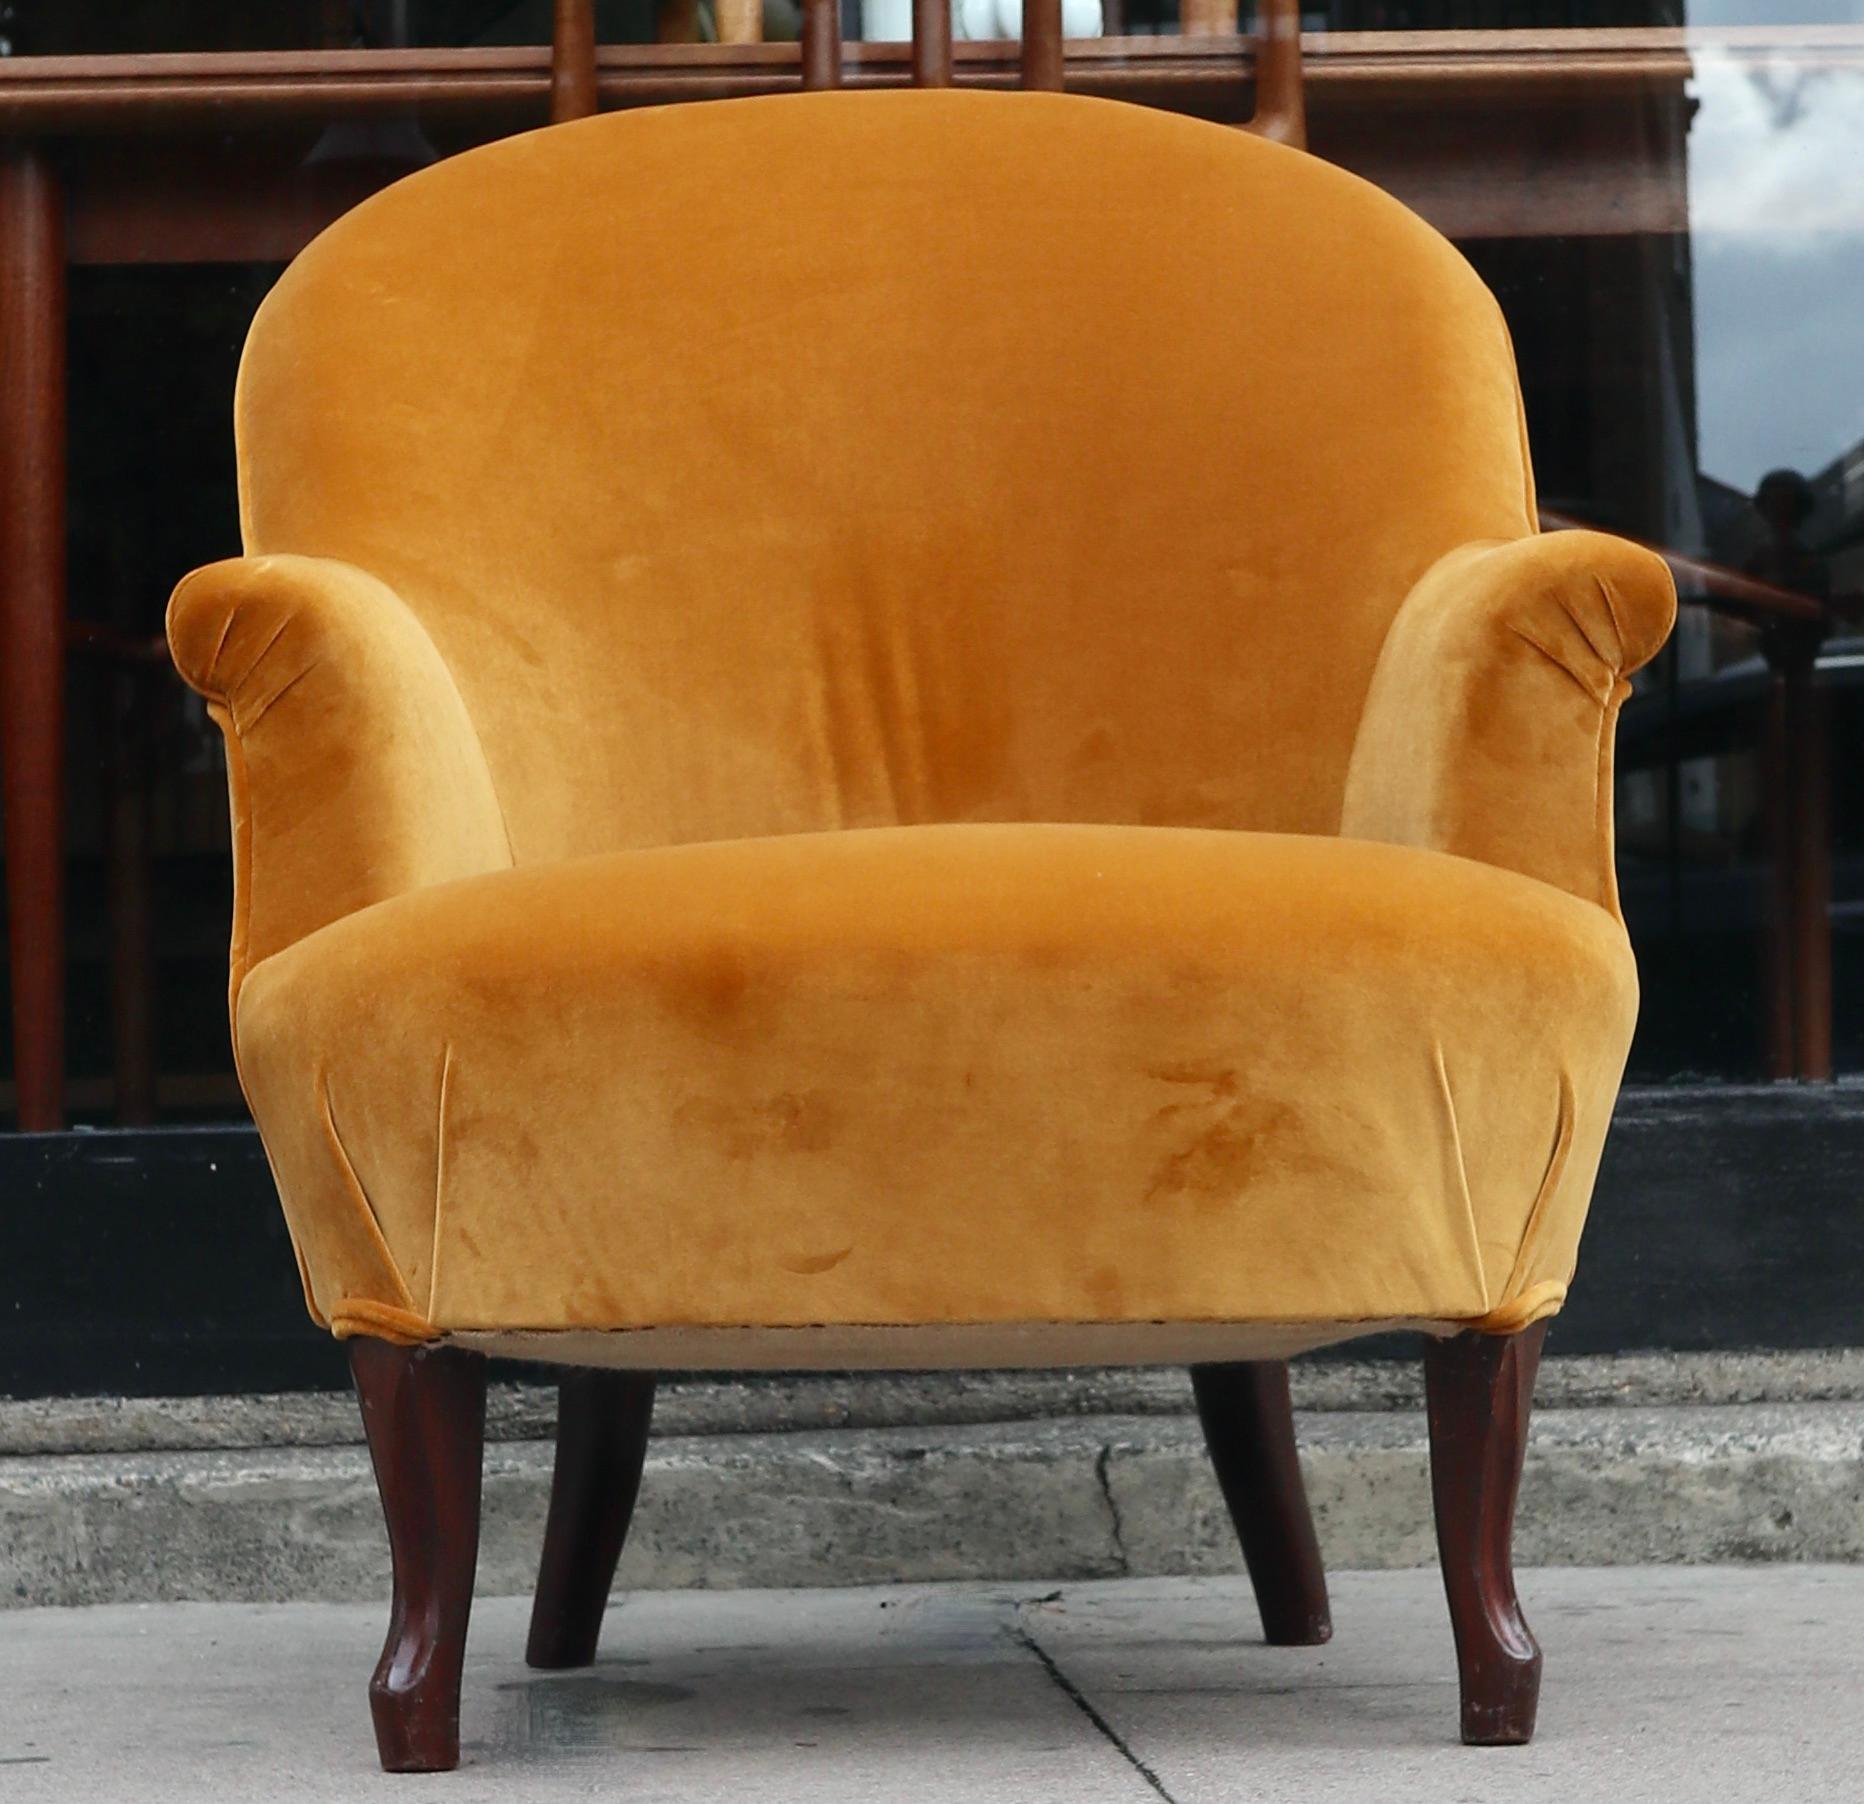 Antique French 19th century Napoleon III crapaud armchair recovered in velvet For Sale 8